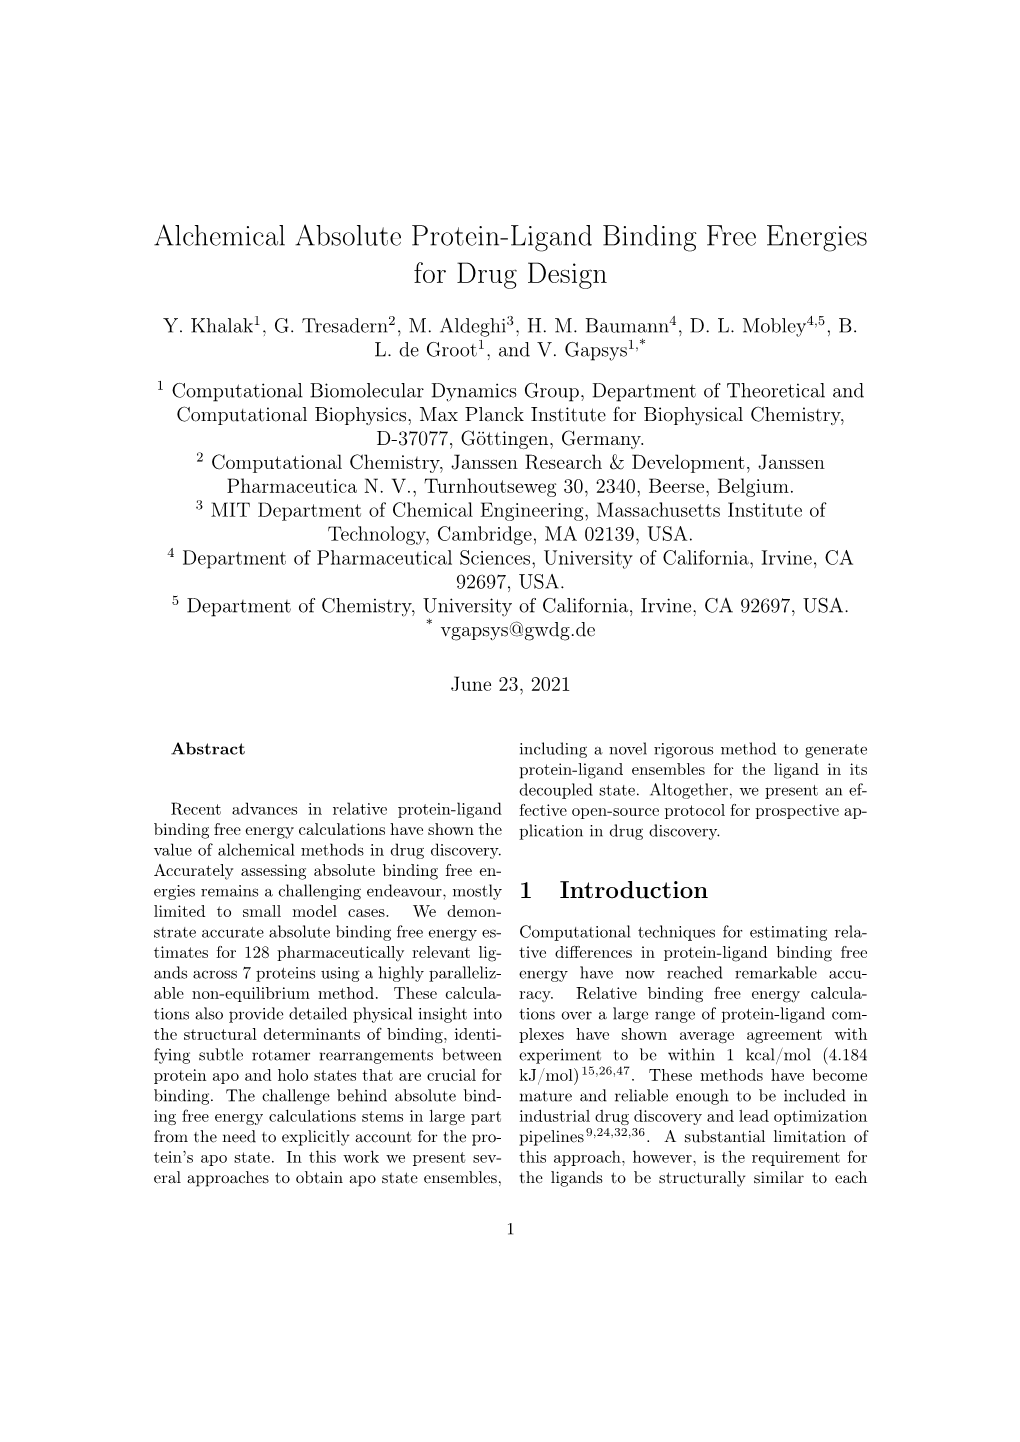 Alchemical Absolute Protein-Ligand Binding Free Energies for Drug Design